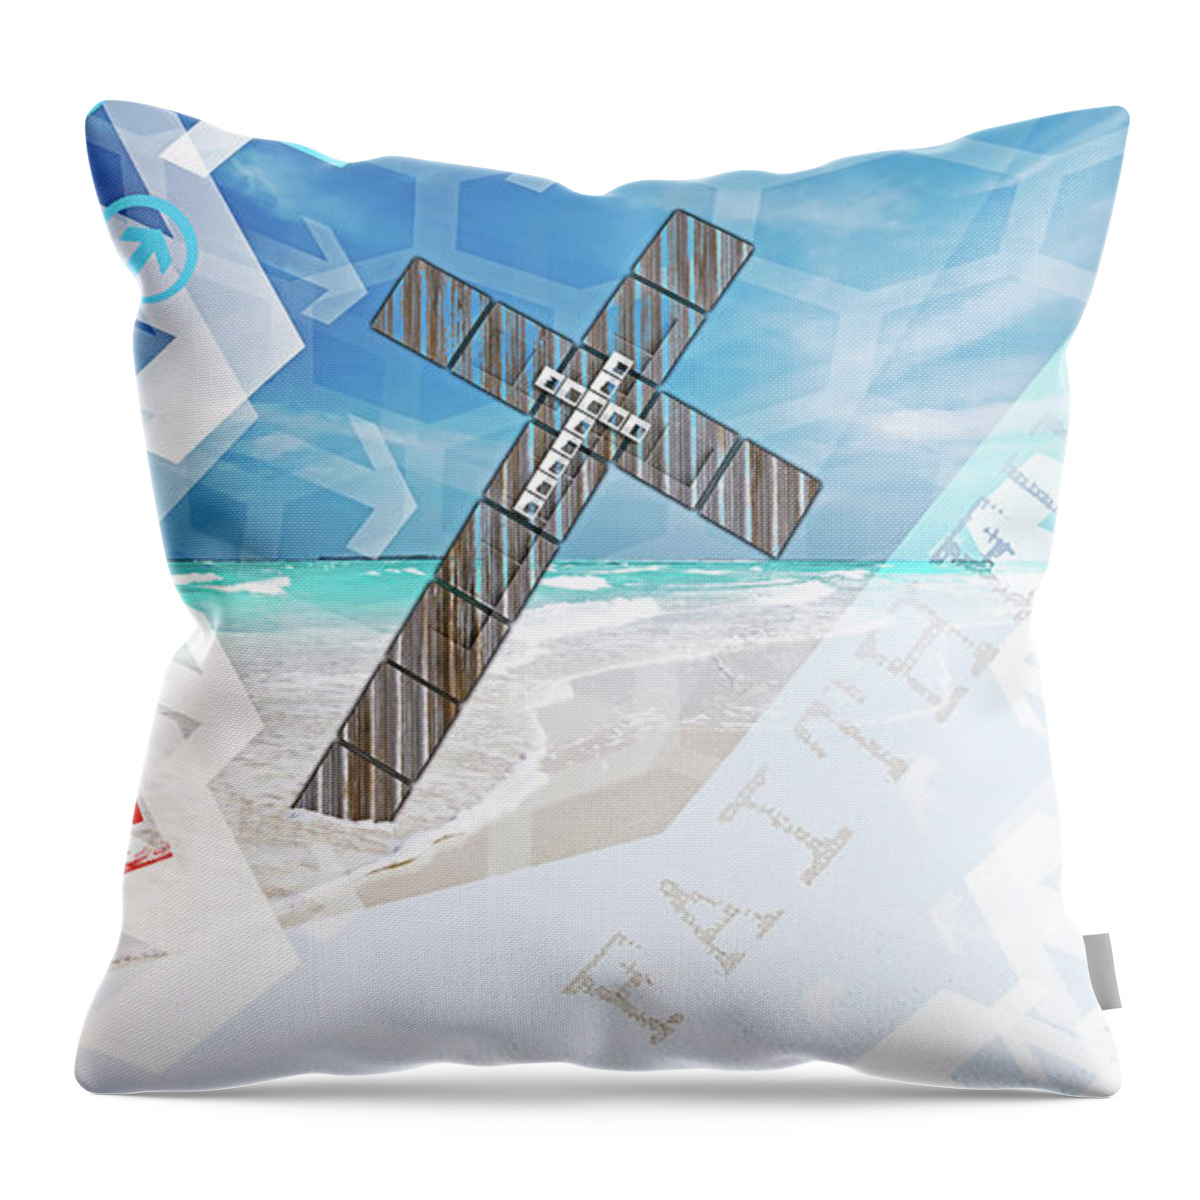 Jesus Throw Pillow featuring the digital art Faithfully by Payet Emmanuel